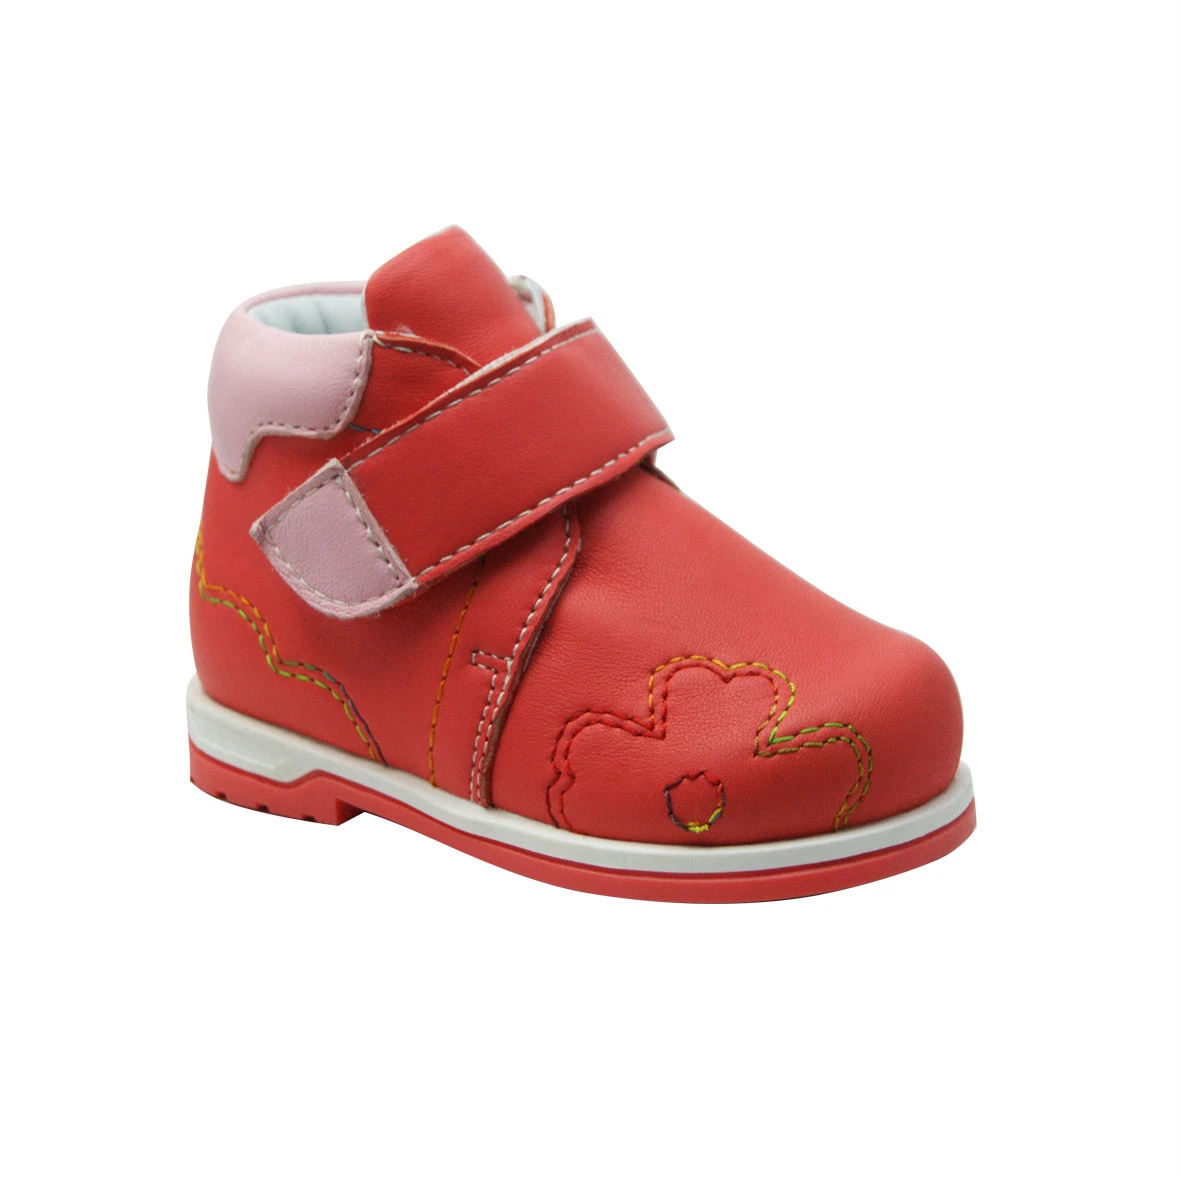 Soft Leather Toddler Shoe with Ankle Support for Stability Prevention Flat Foot